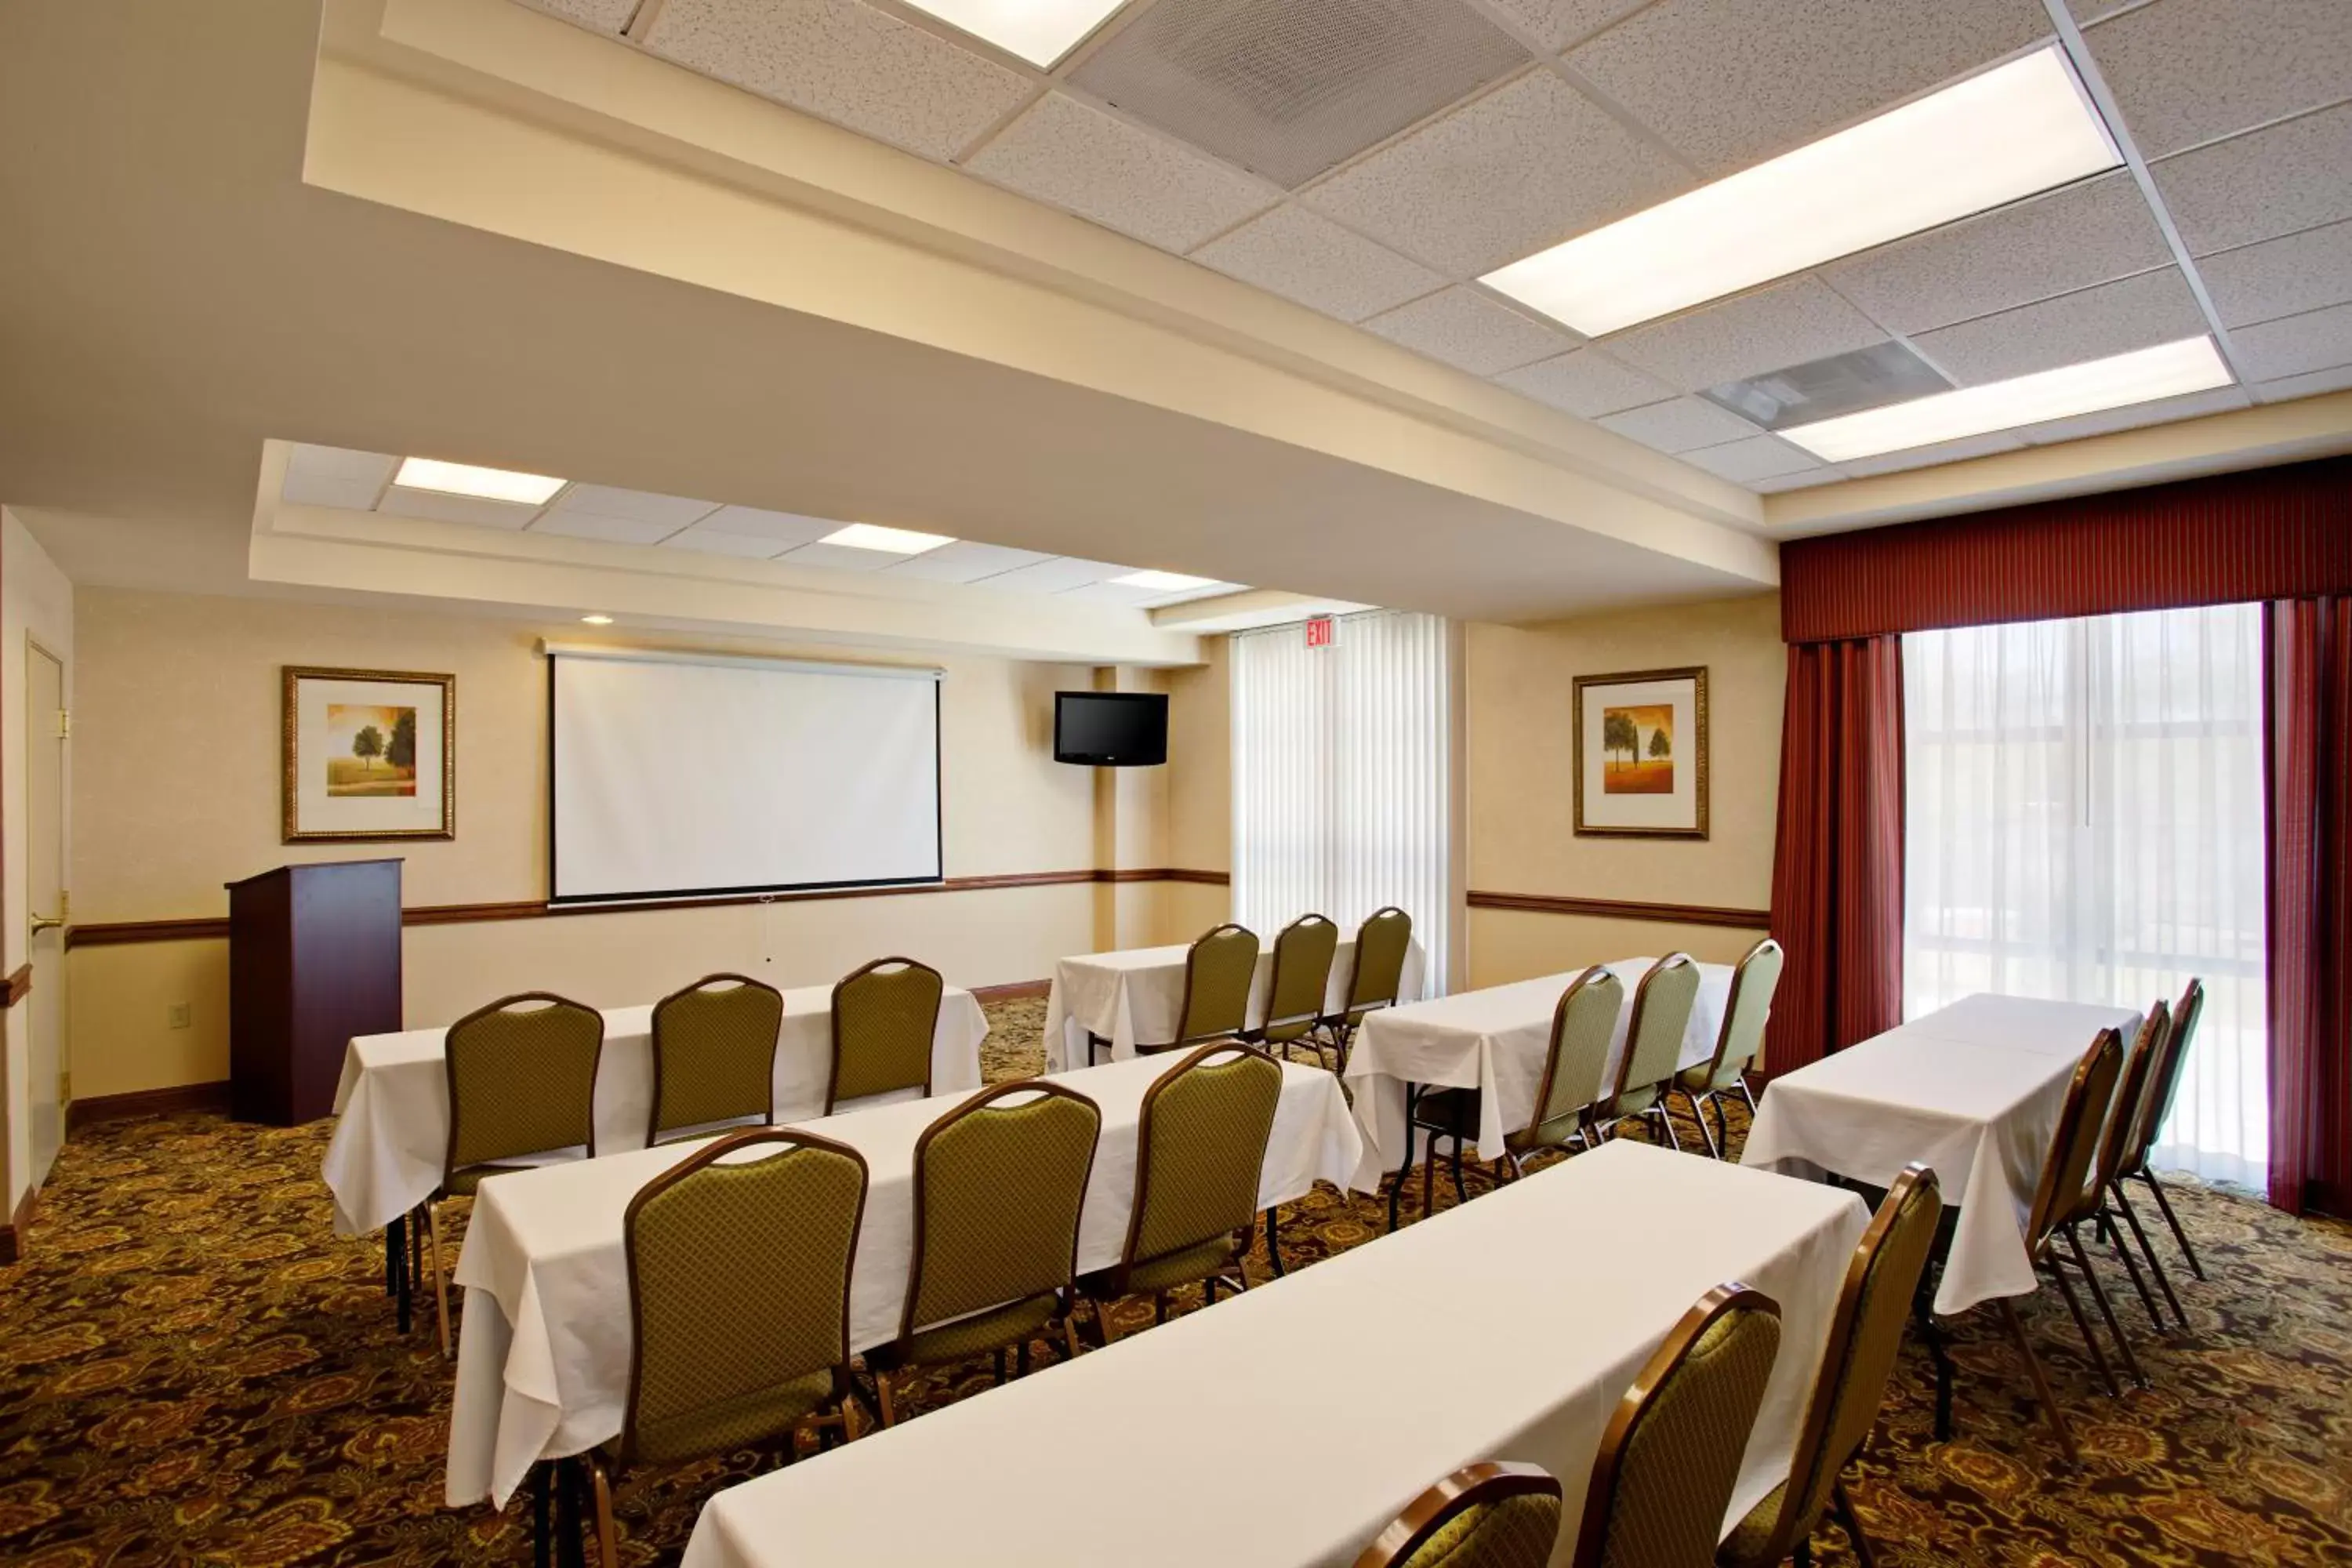 Meeting/conference room in Country Inn & Suites by Radisson, Tucson City Center, AZ